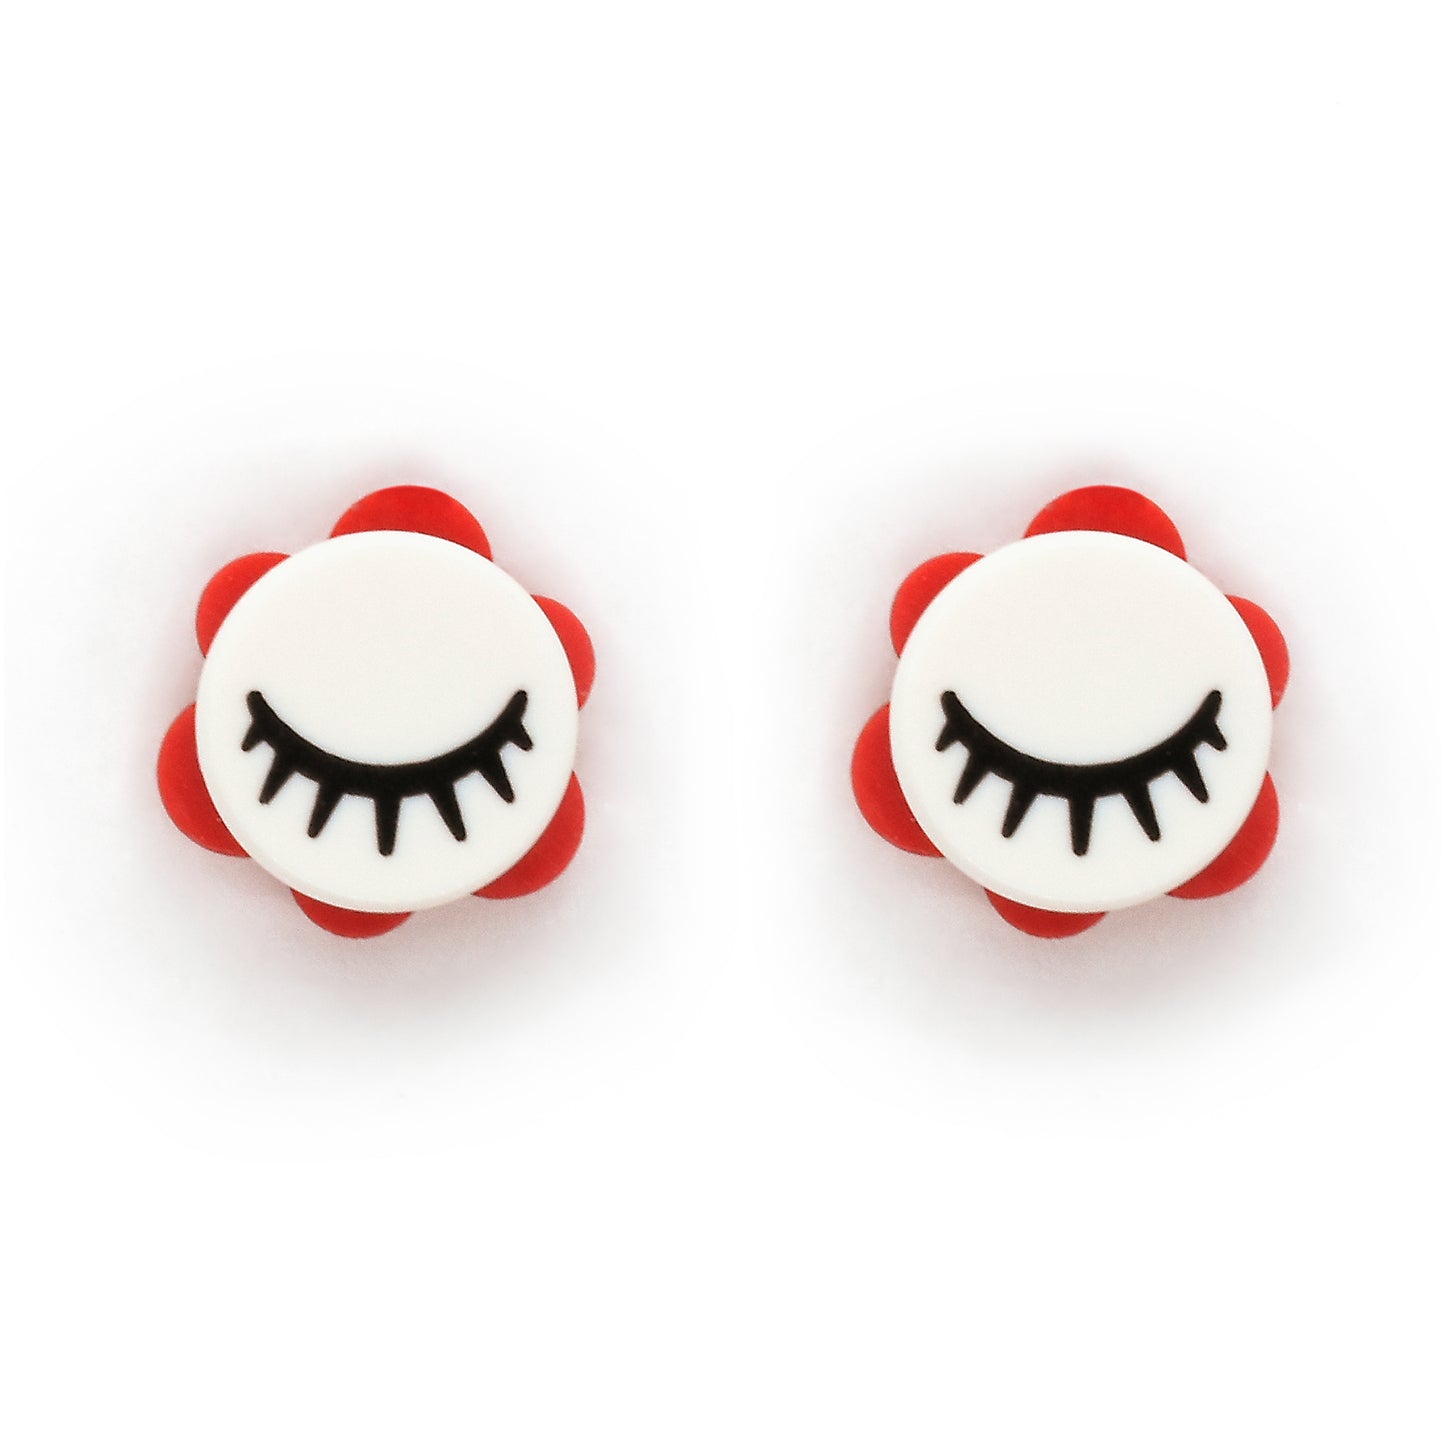 Brick Eyelashes Dreaming Stud Earrings, coquette style